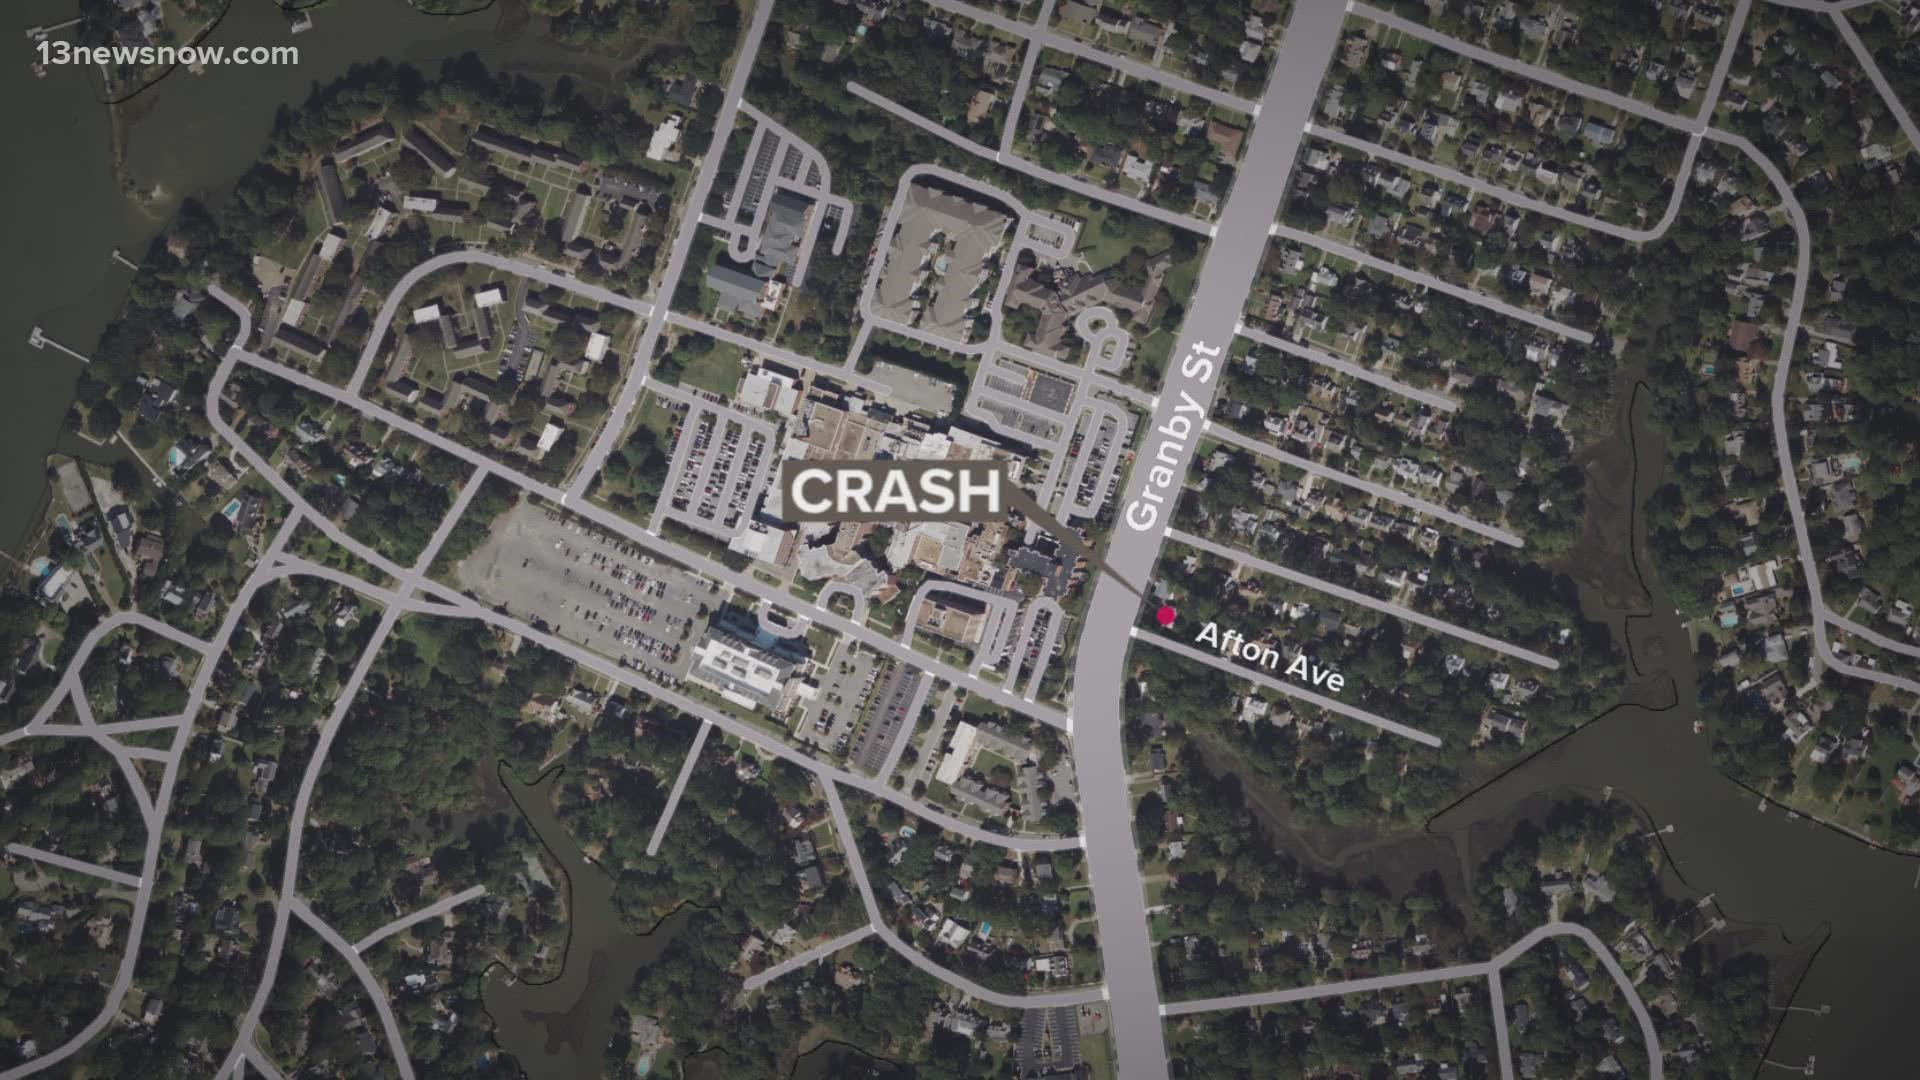 The crash happened around 11 a.m. on Jan. 3 near the intersection of Granby Street and Afton Avenue. Jay Meeker, of Norfolk, died from his injuries.